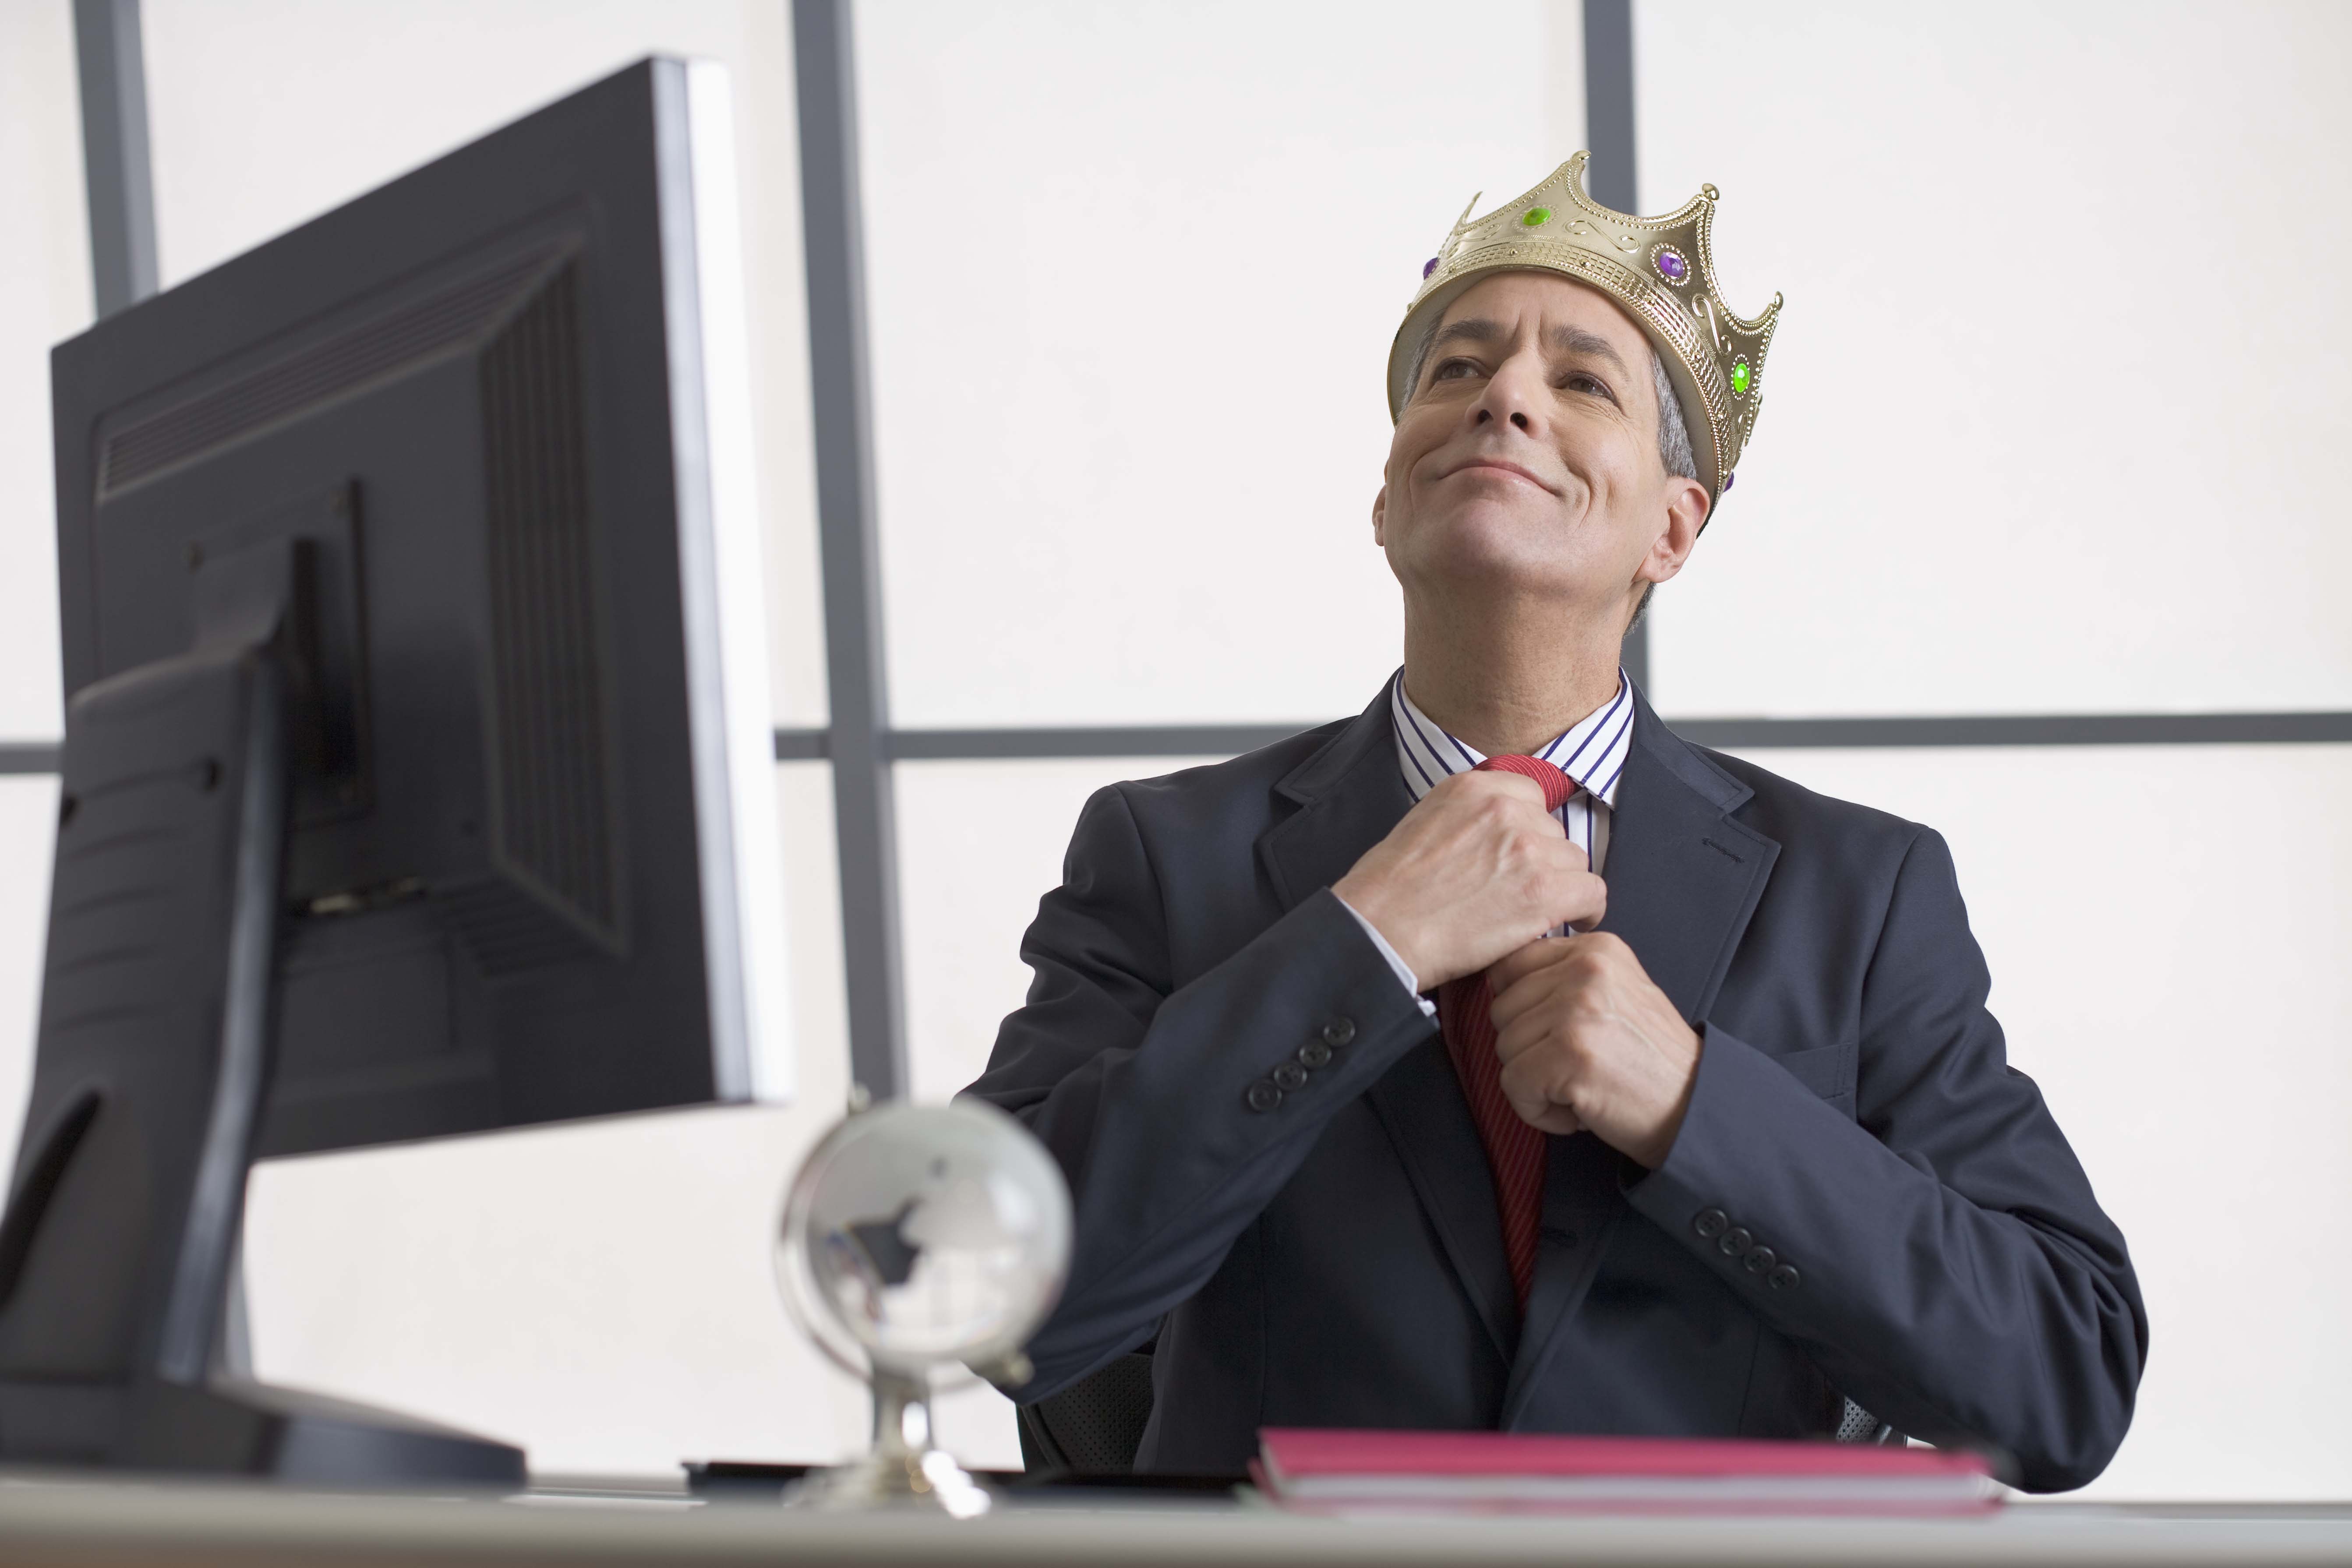 A man with crown fixing his tie while sitting at his desk. | Source: Getty Images